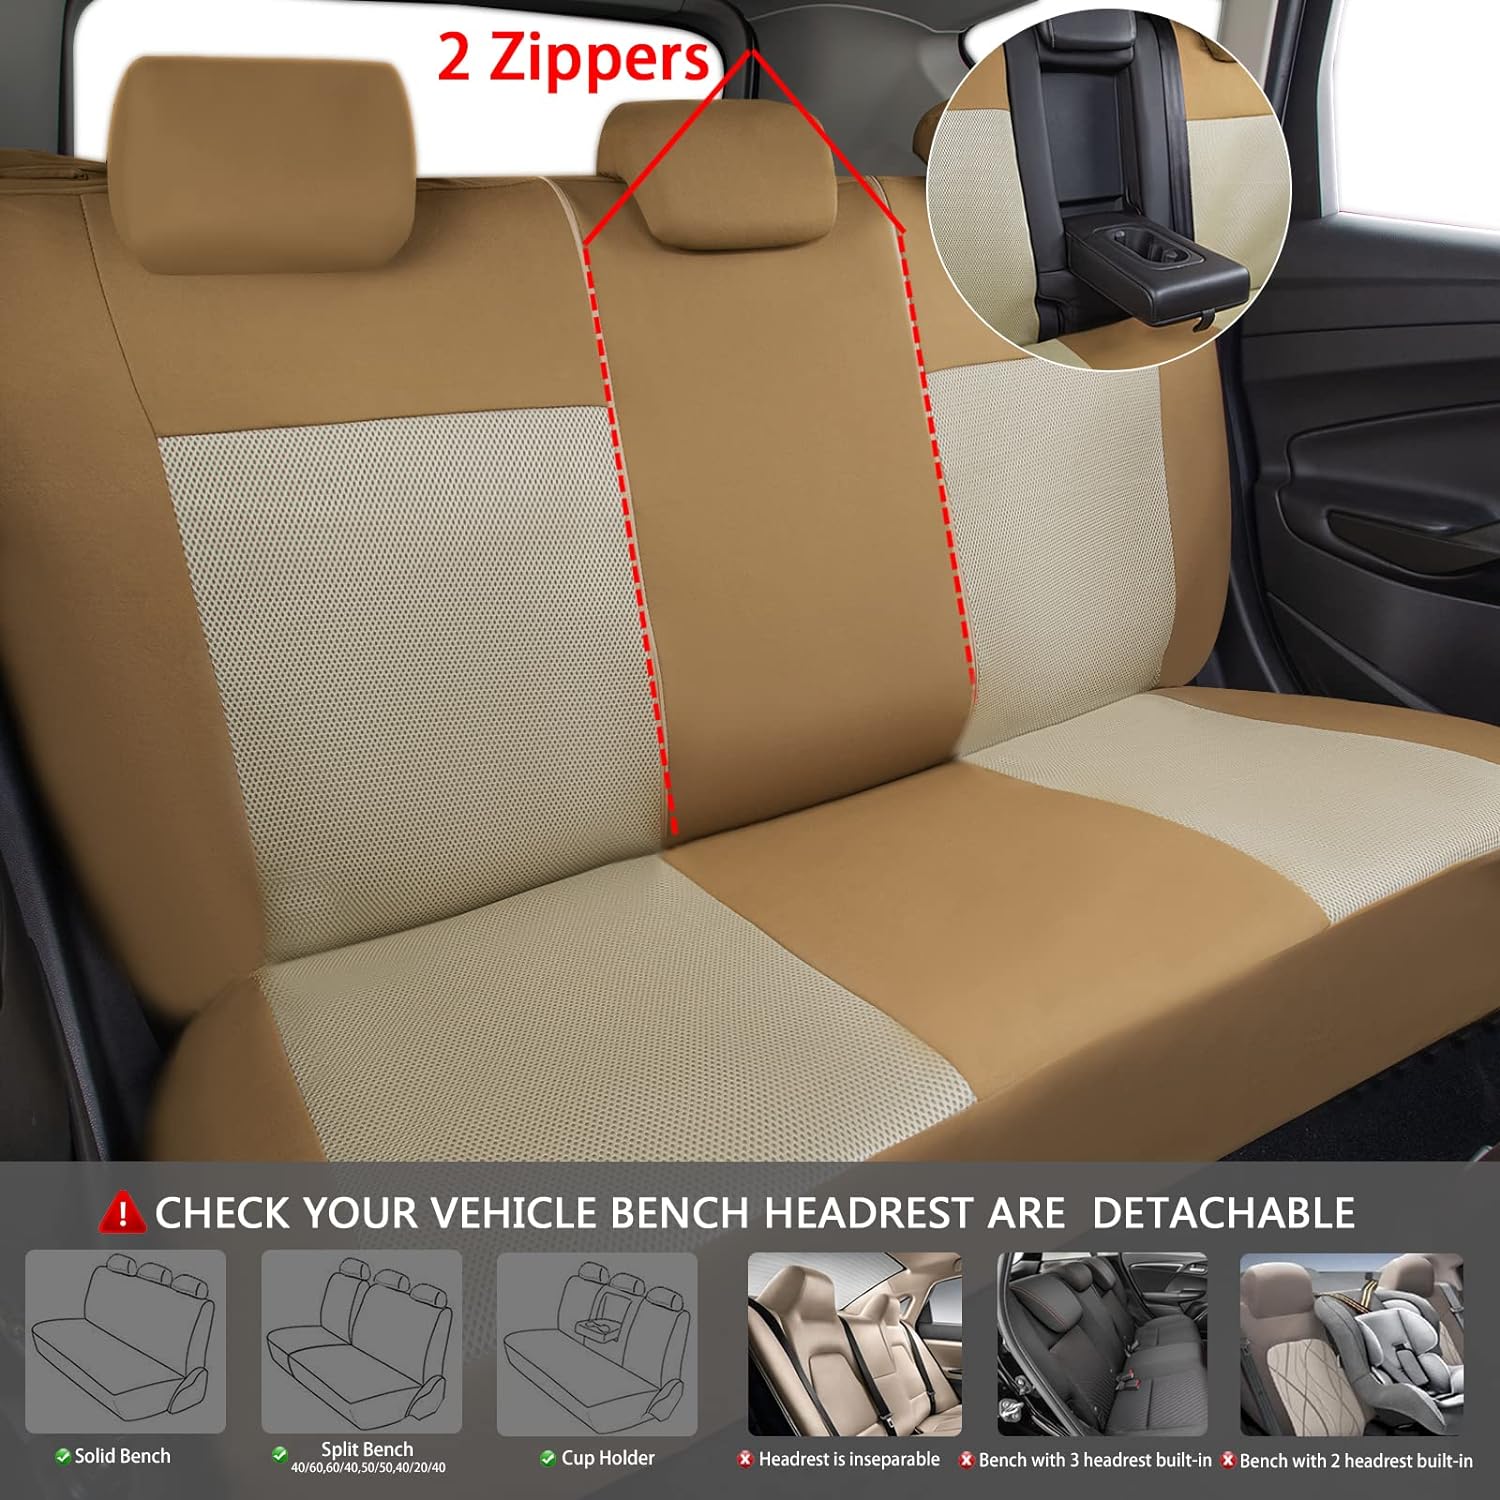 CAR PASS Seat Cover Full Sets and car mats & Steering Wheel Covers, 3D Air Mesh Car Seat Cover with 5mm Composite Sponge Inside,Airbag Compatible Universal Fit for SUV,Vans,sedans, Trucks, (Beige)